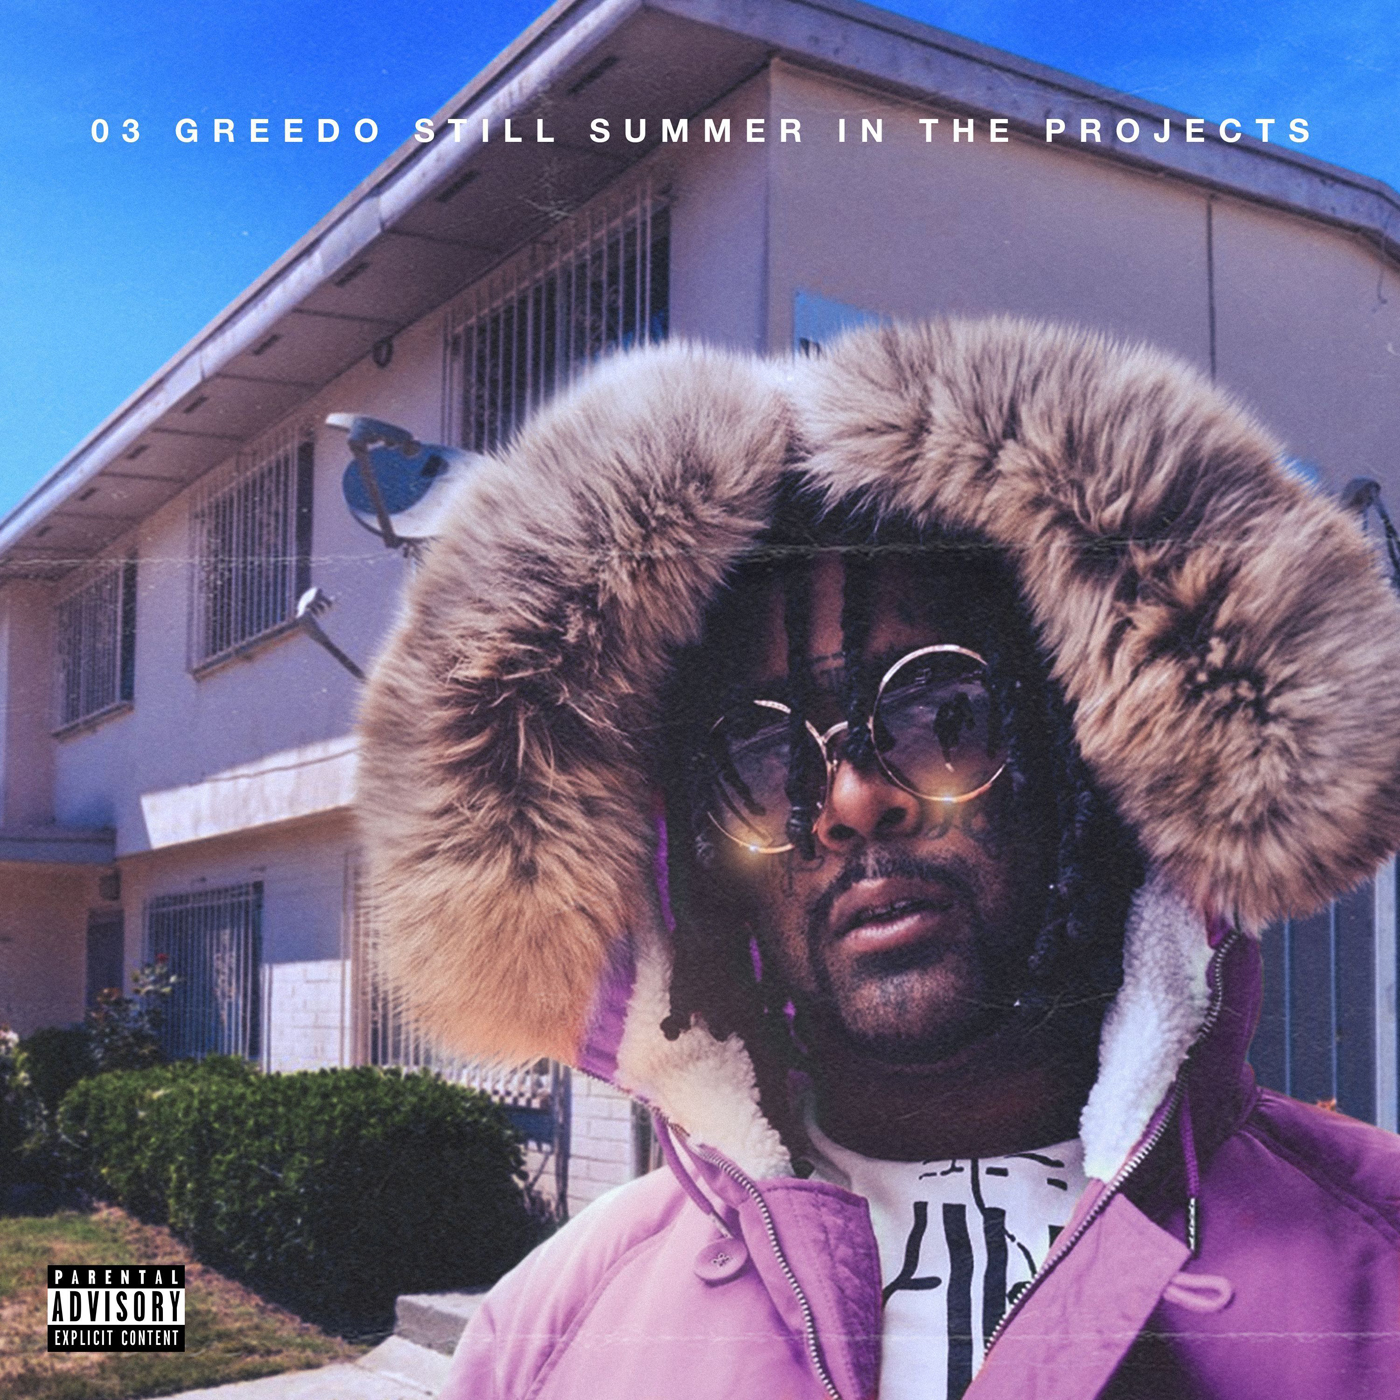 03 greedo still summer in the projects